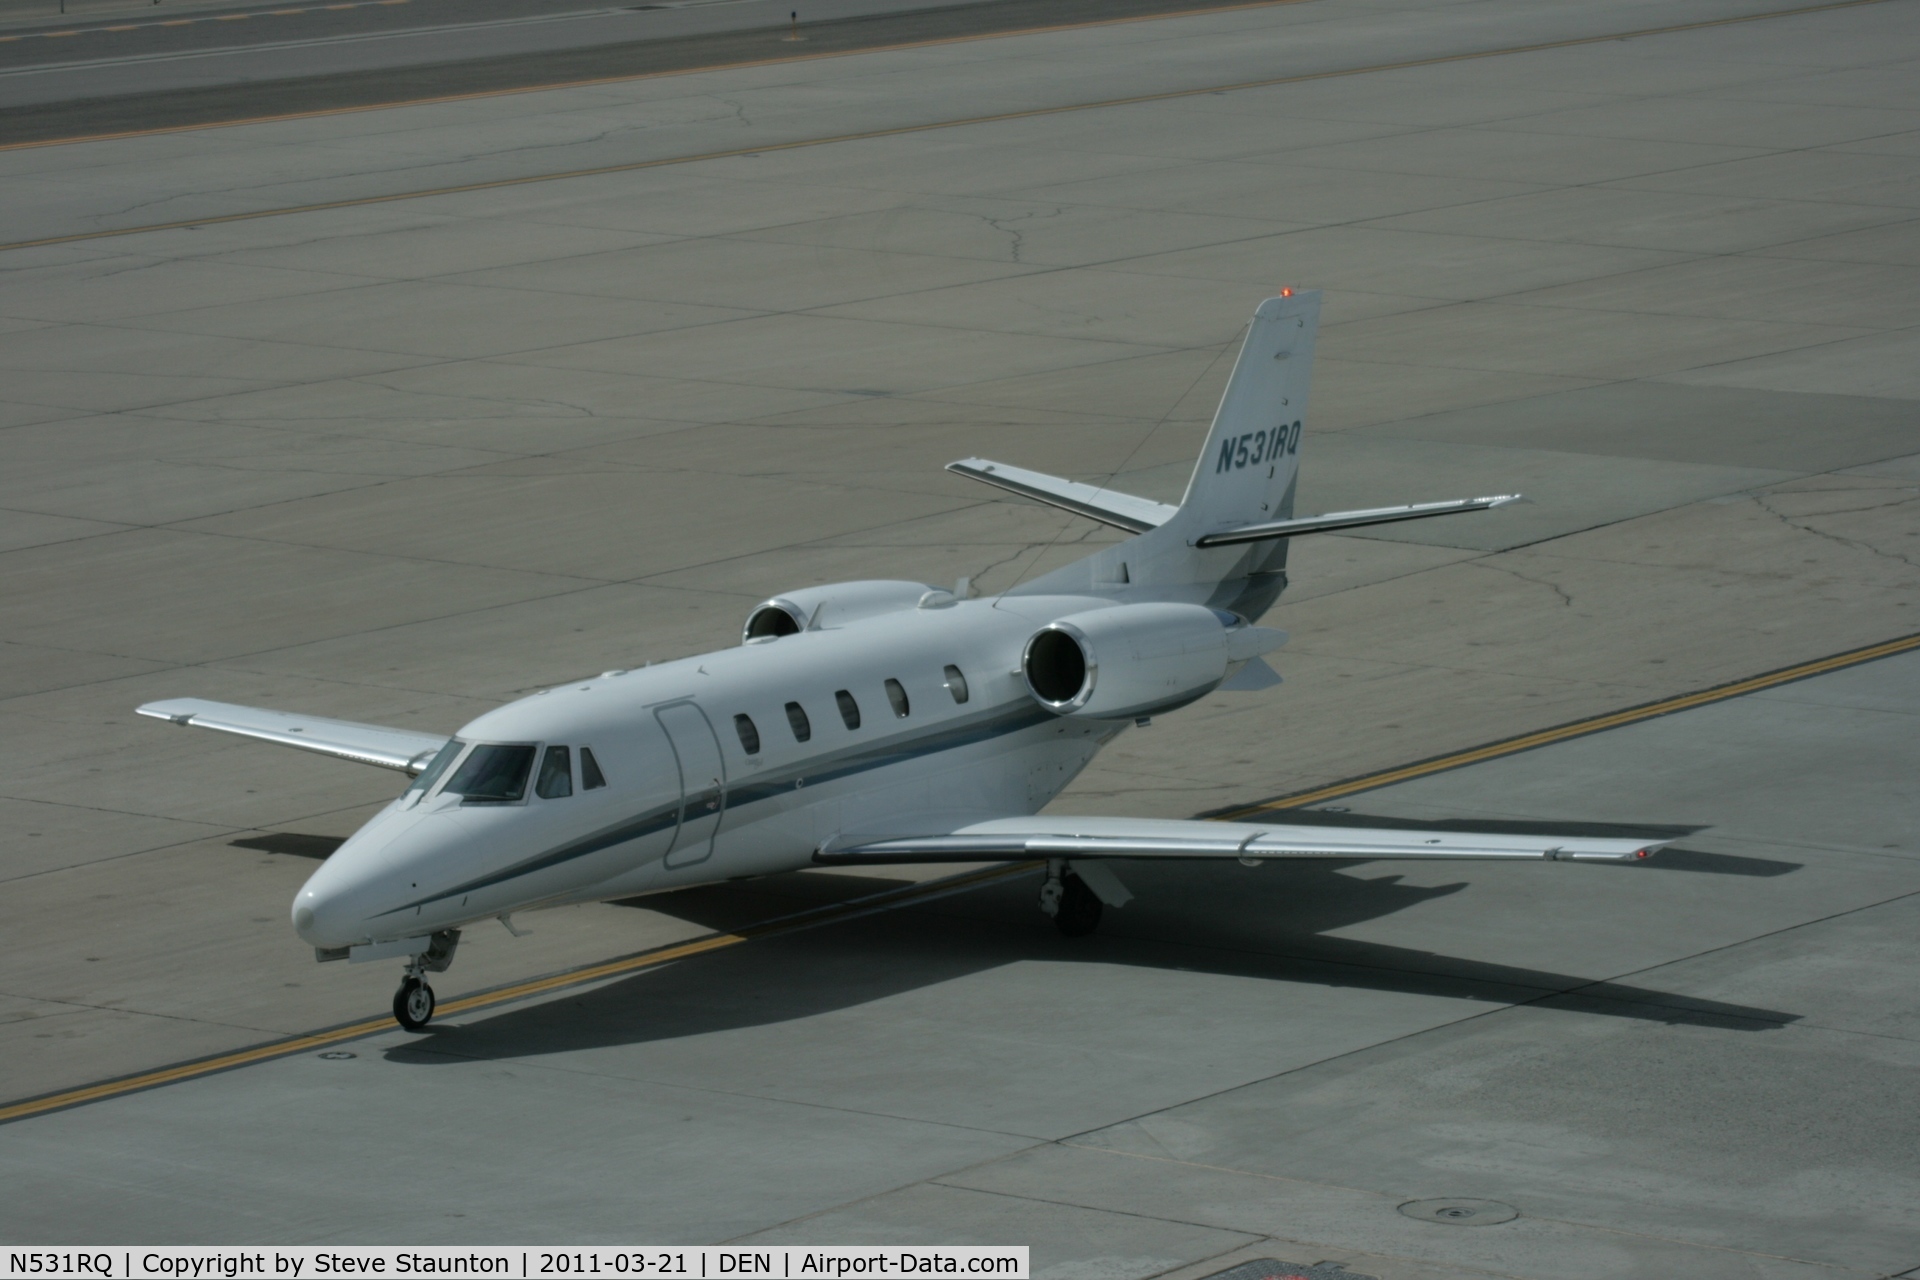 N531RQ, 2001 Cessna 560XL Citation Excel C/N 560-5184, Taken at Denver International Airport, in March 2011 whilst on an Aeroprint Aviation tour